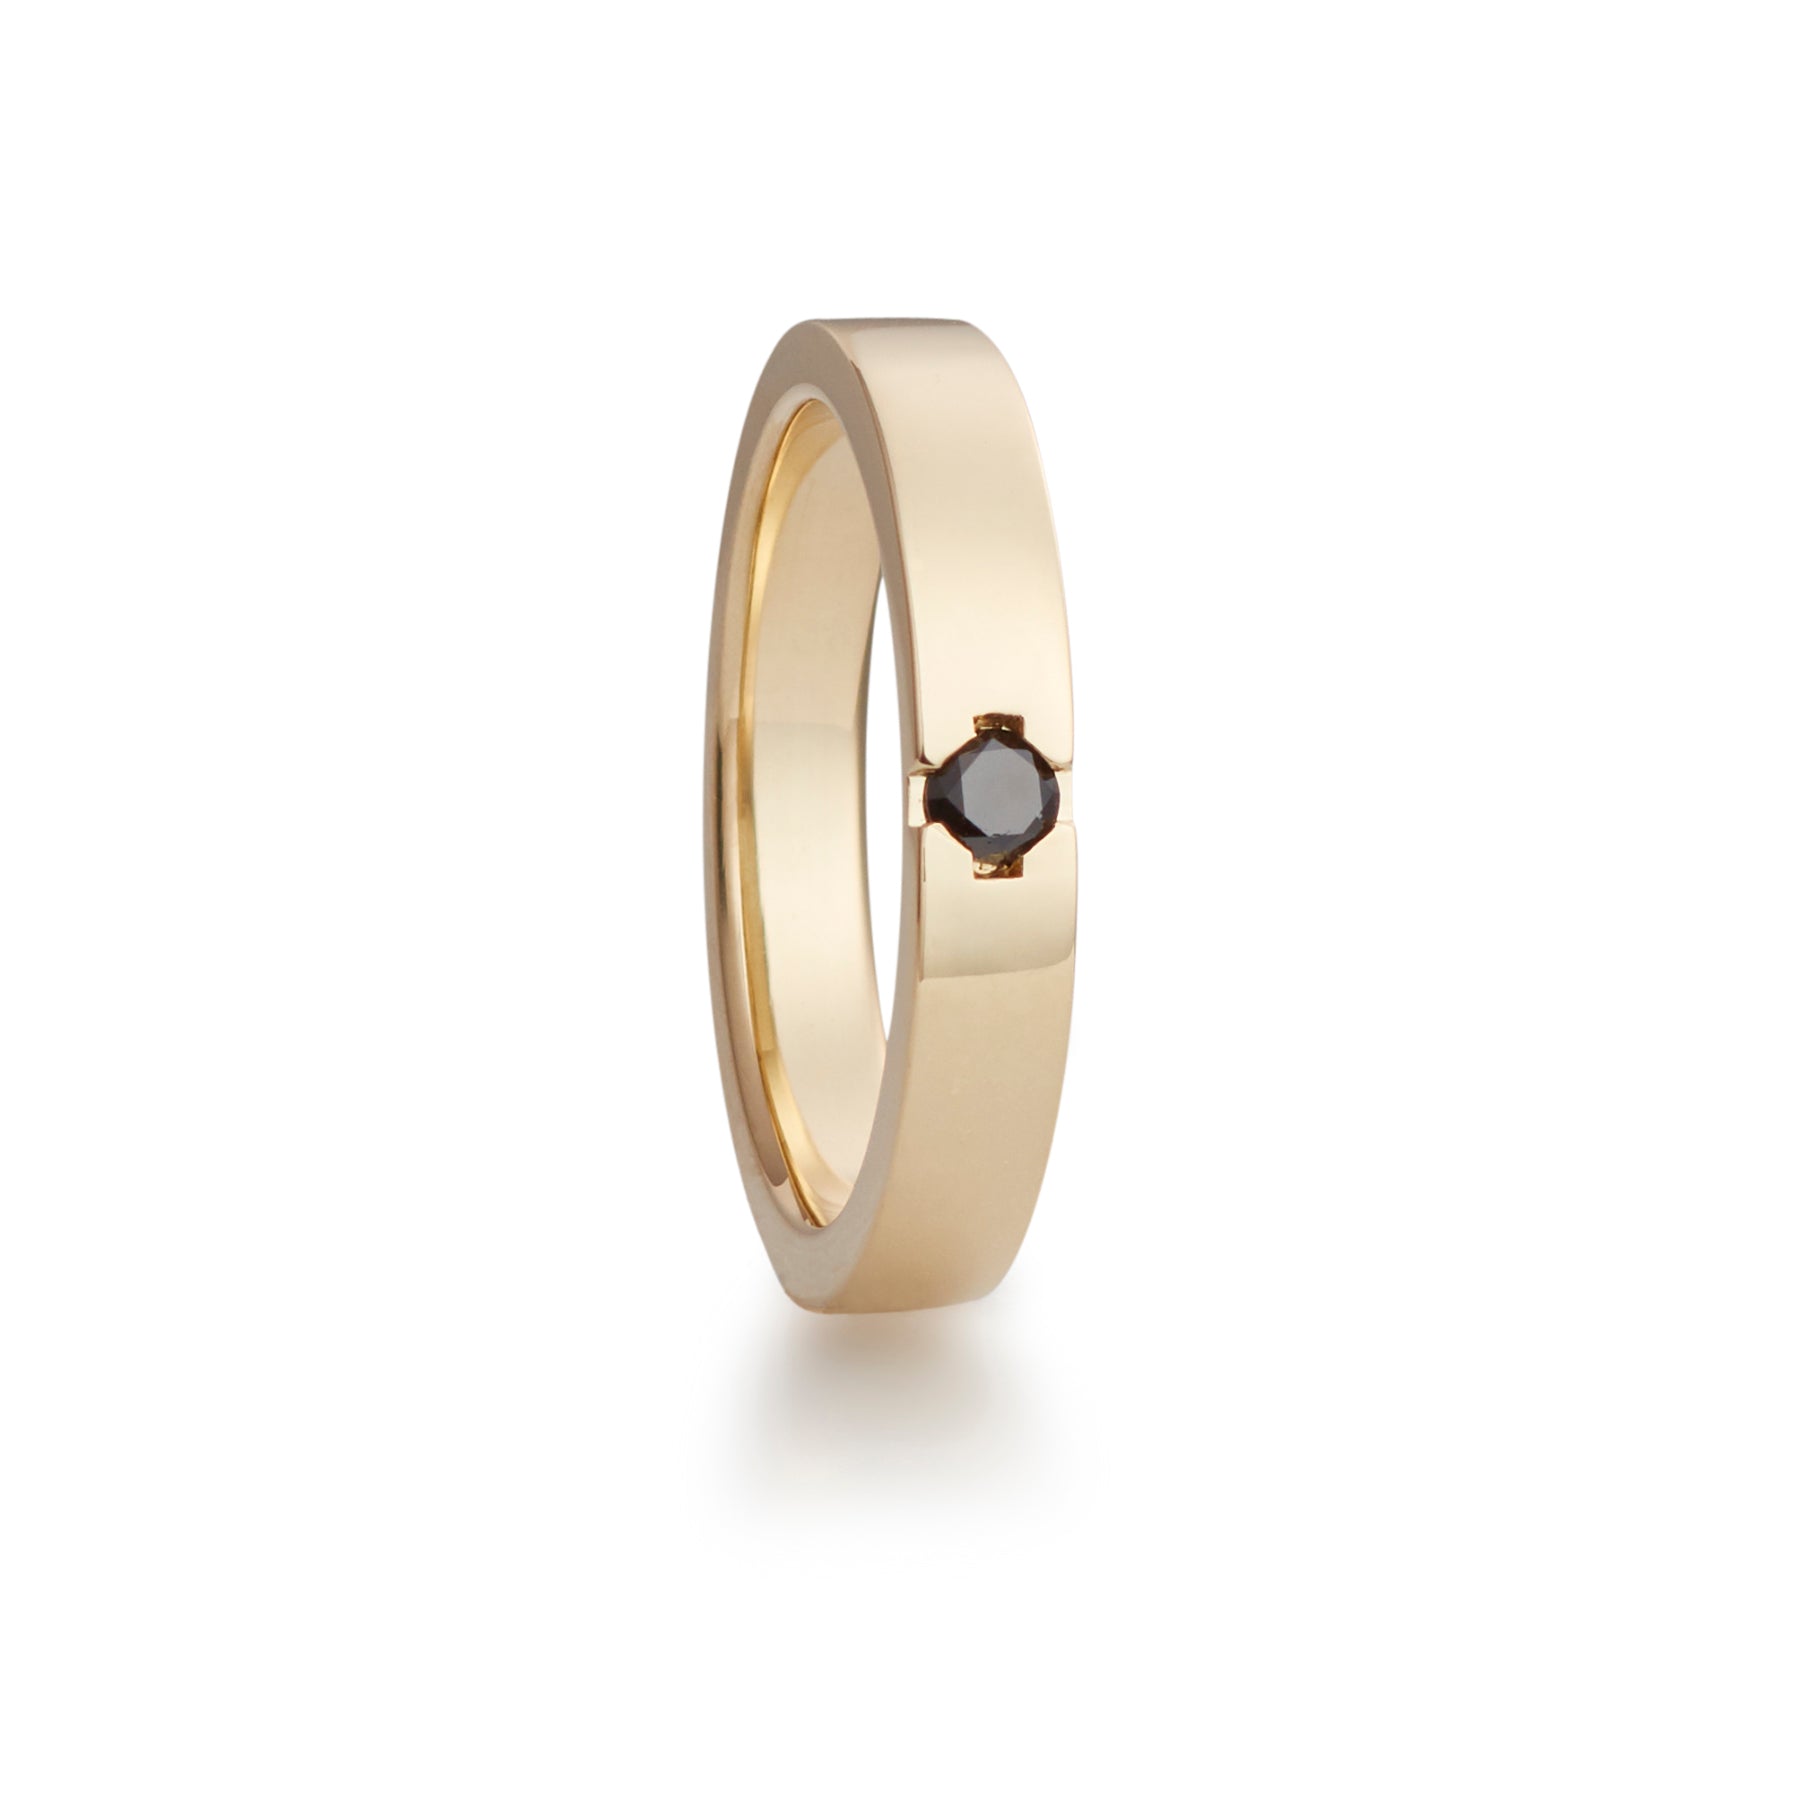 Majestic ring in yellow gold with black diamond, men&